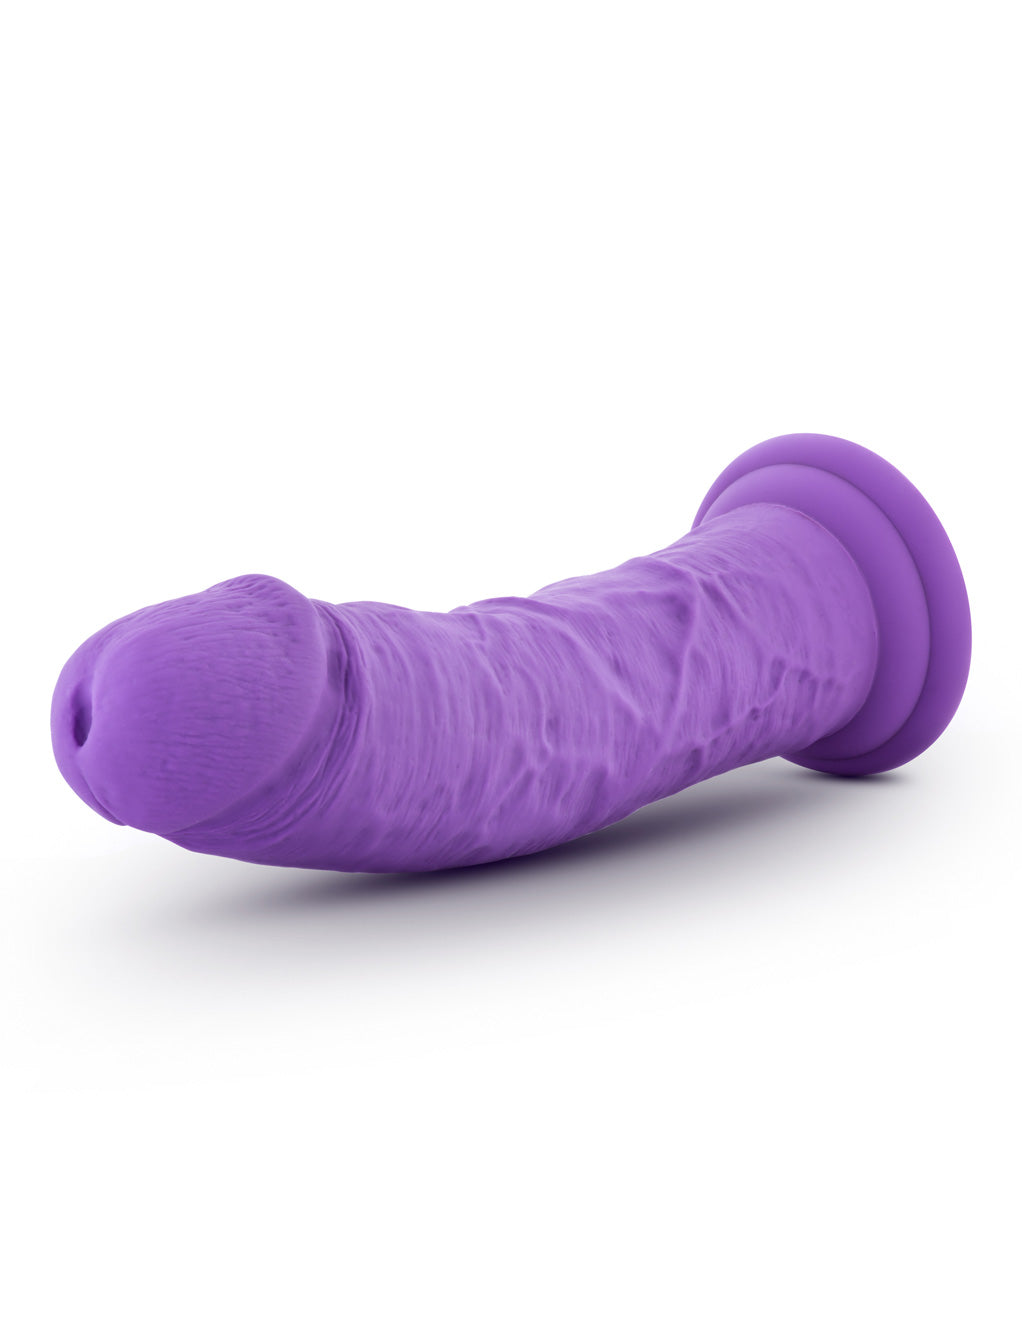 Ruse Jammy Suction Cup Dildo- Laying down